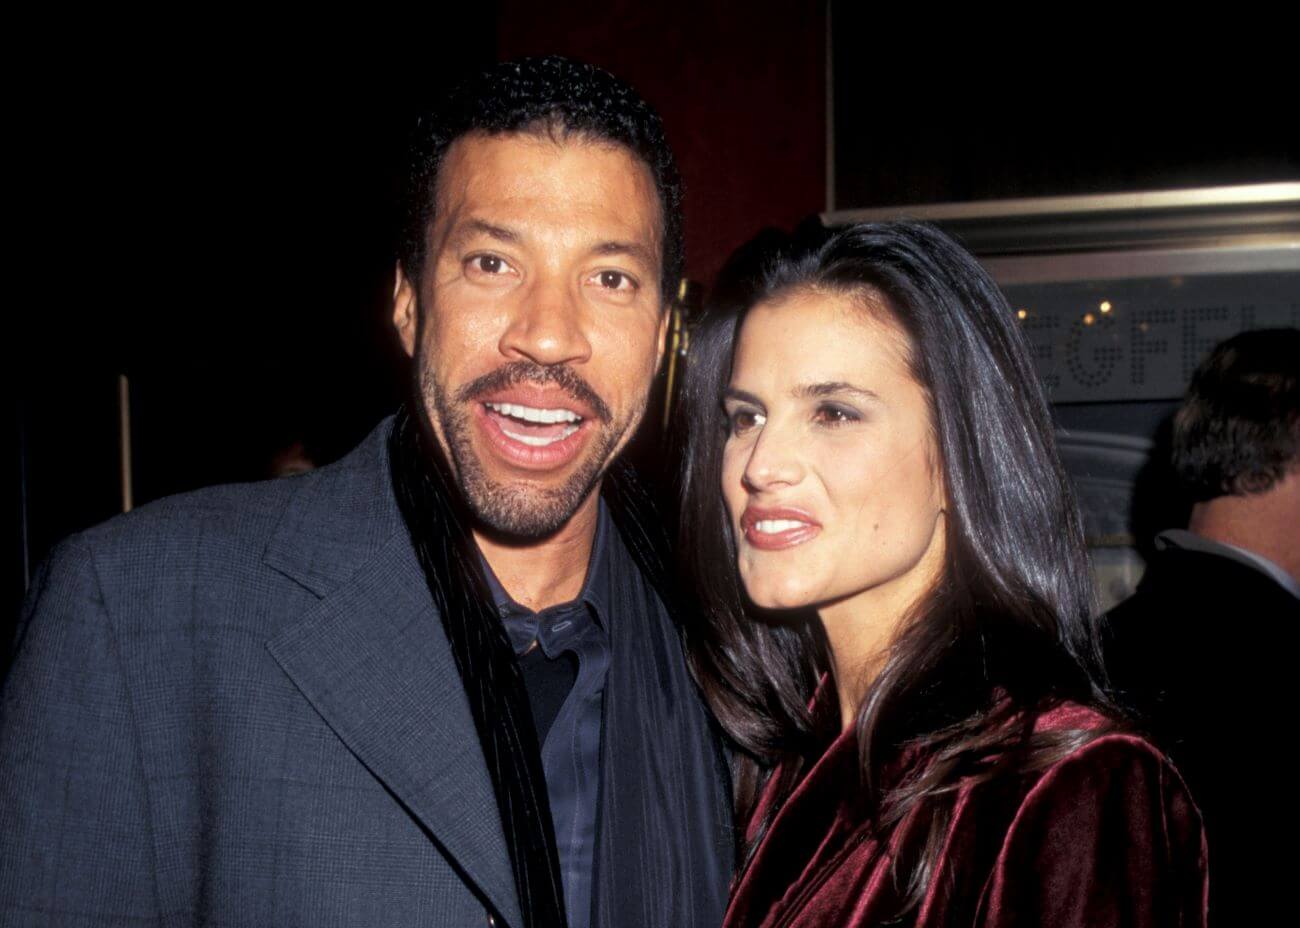 Lionel Richie and Diane Alexander wear coats outside of a theater.